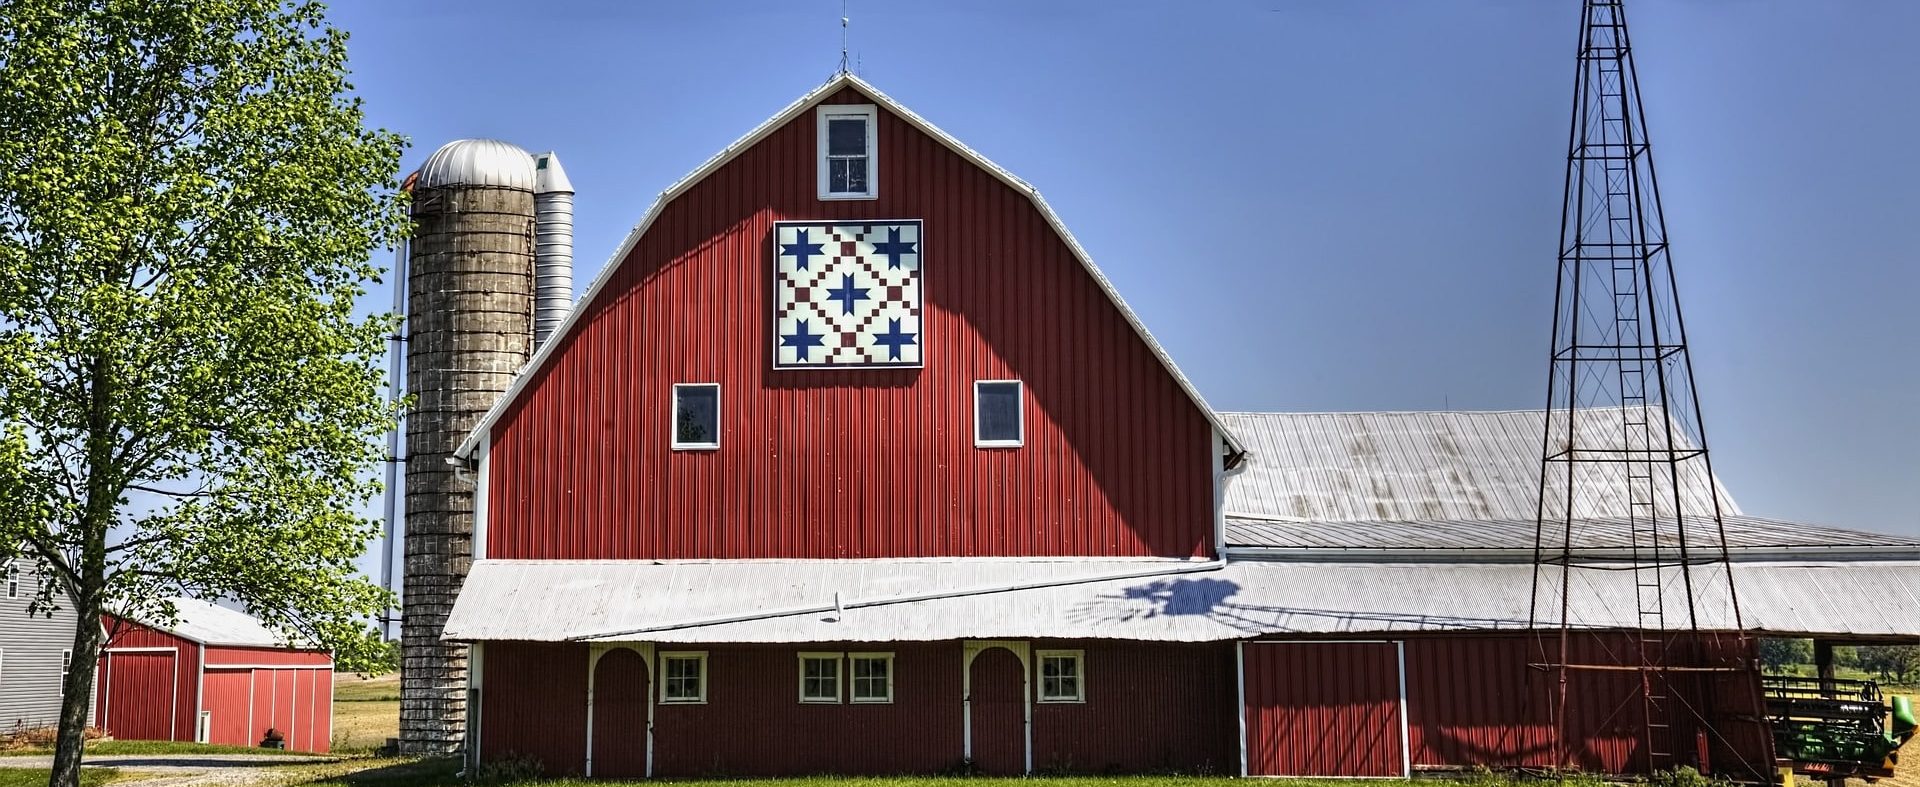 Barn Quilt Design Competition